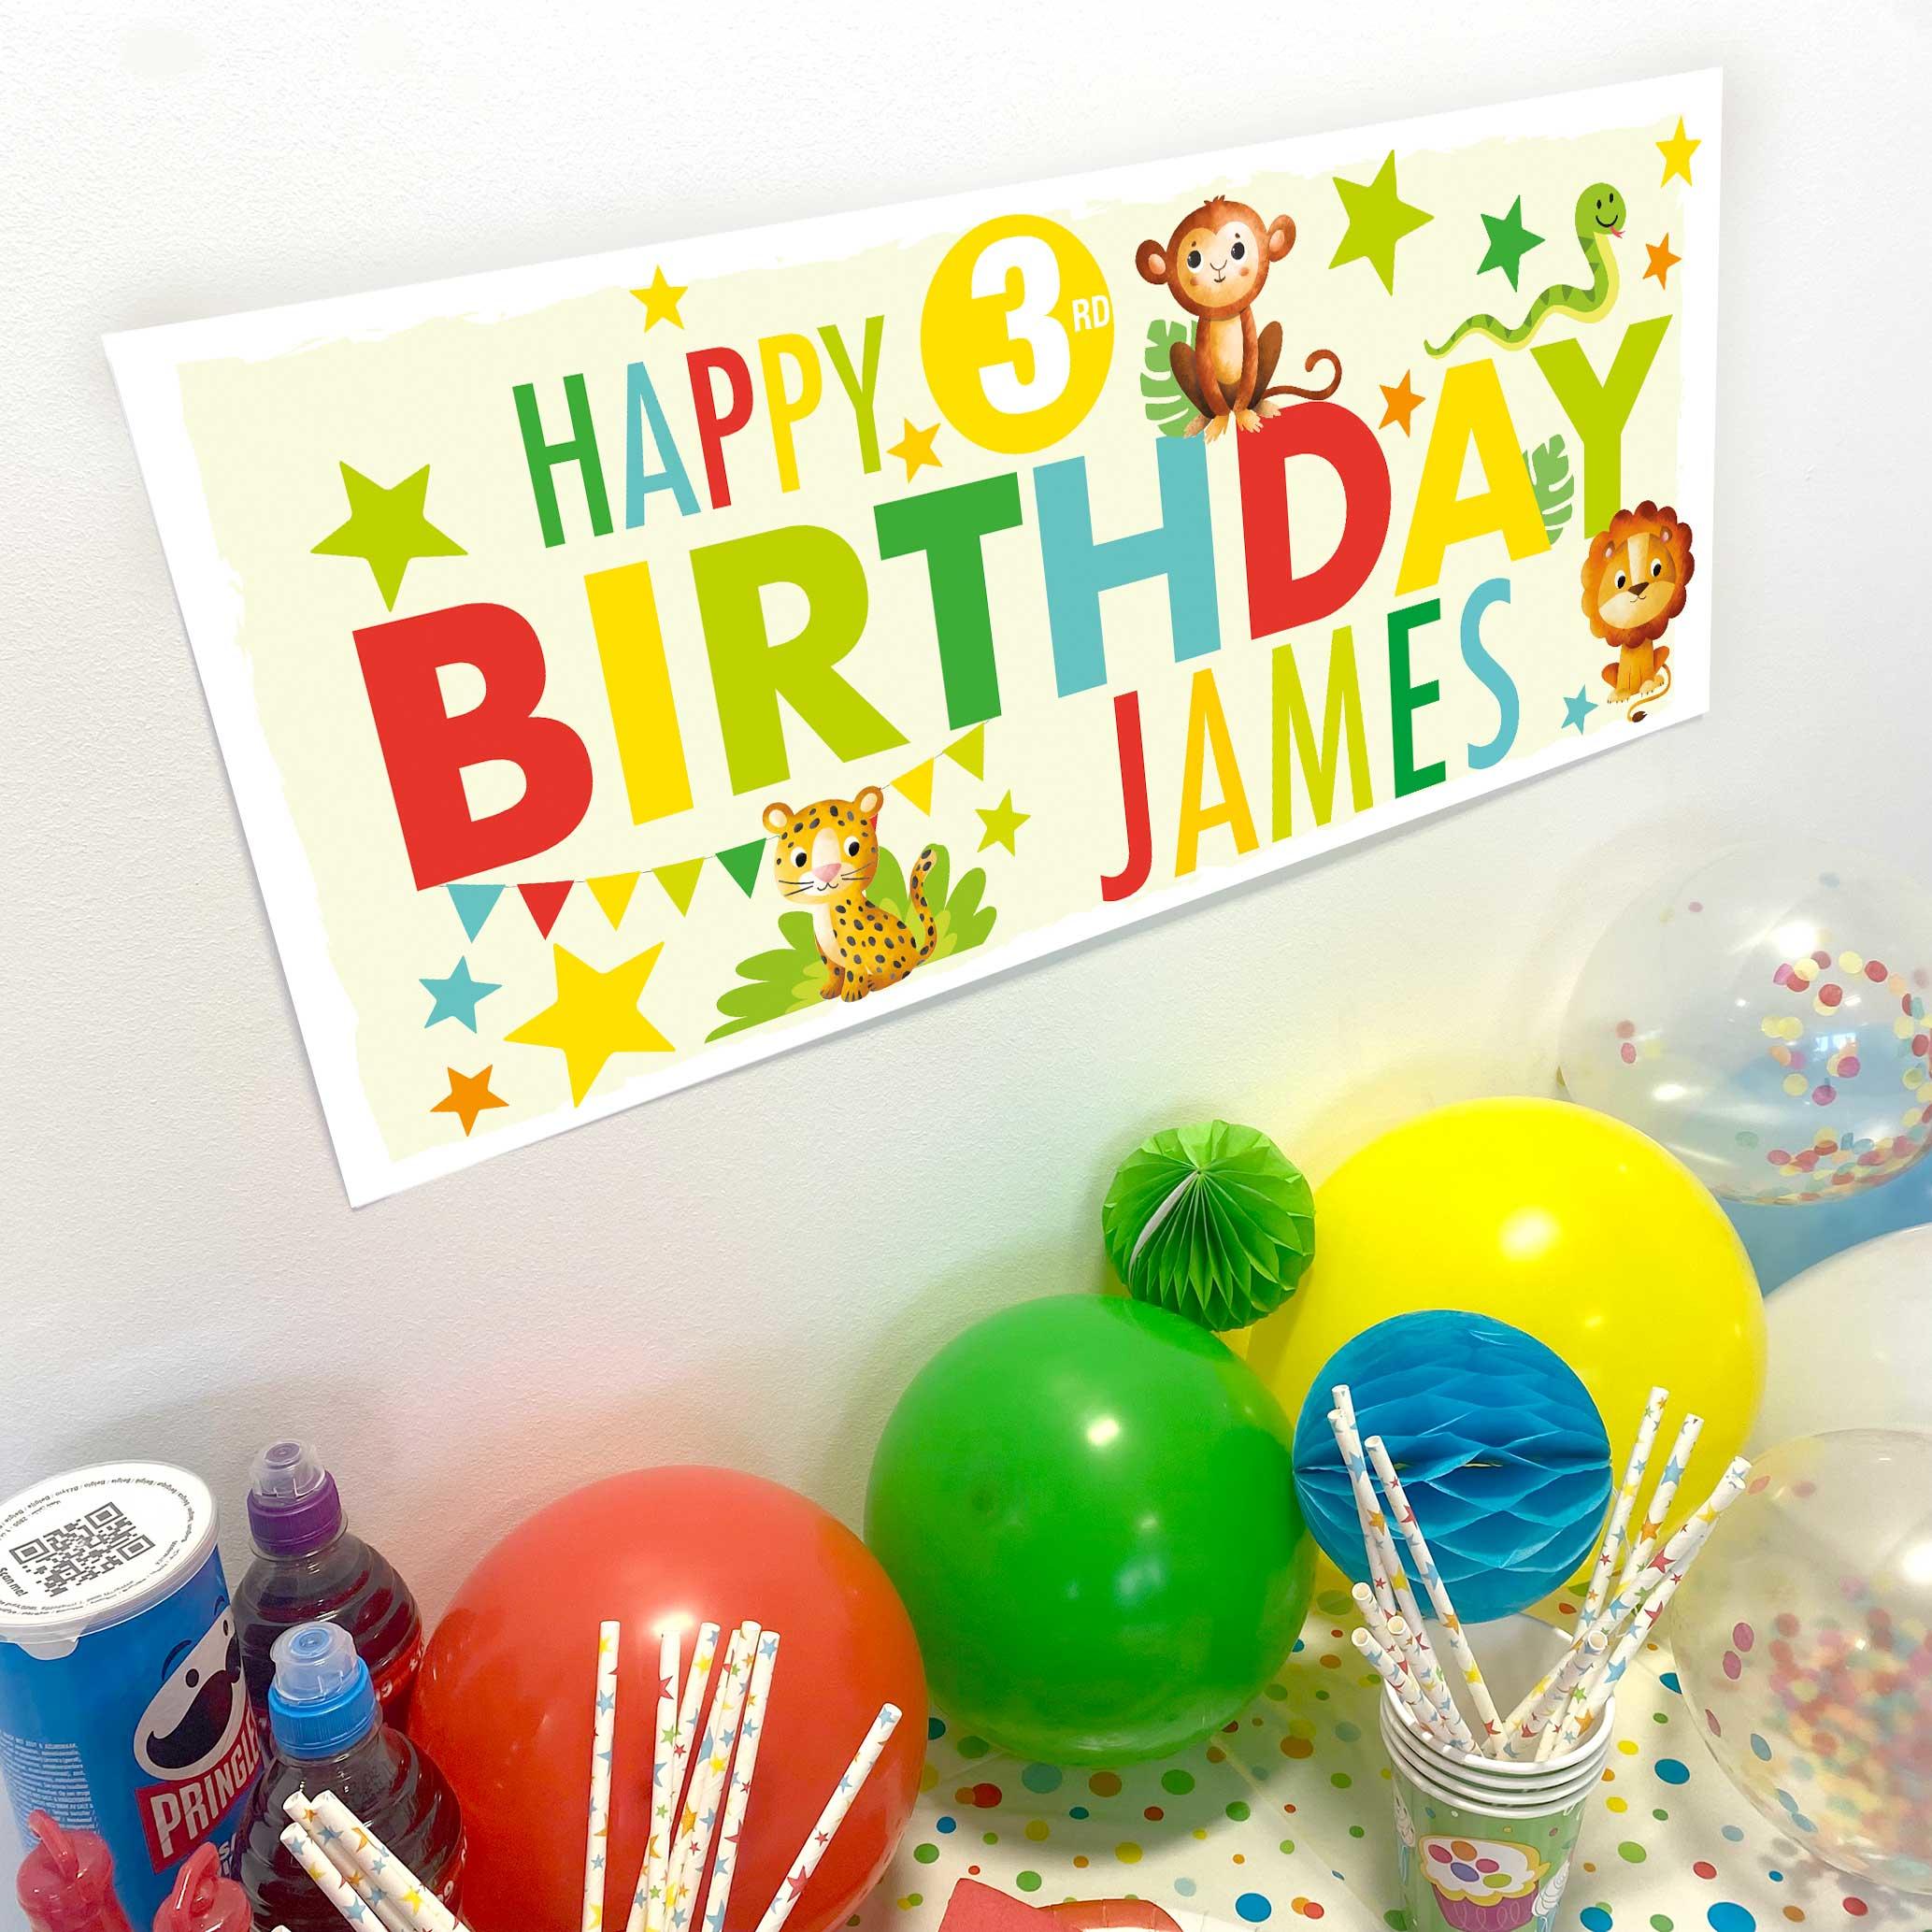 frame my name, jungle birthday banners, party banners, jungle birthday banners for kids